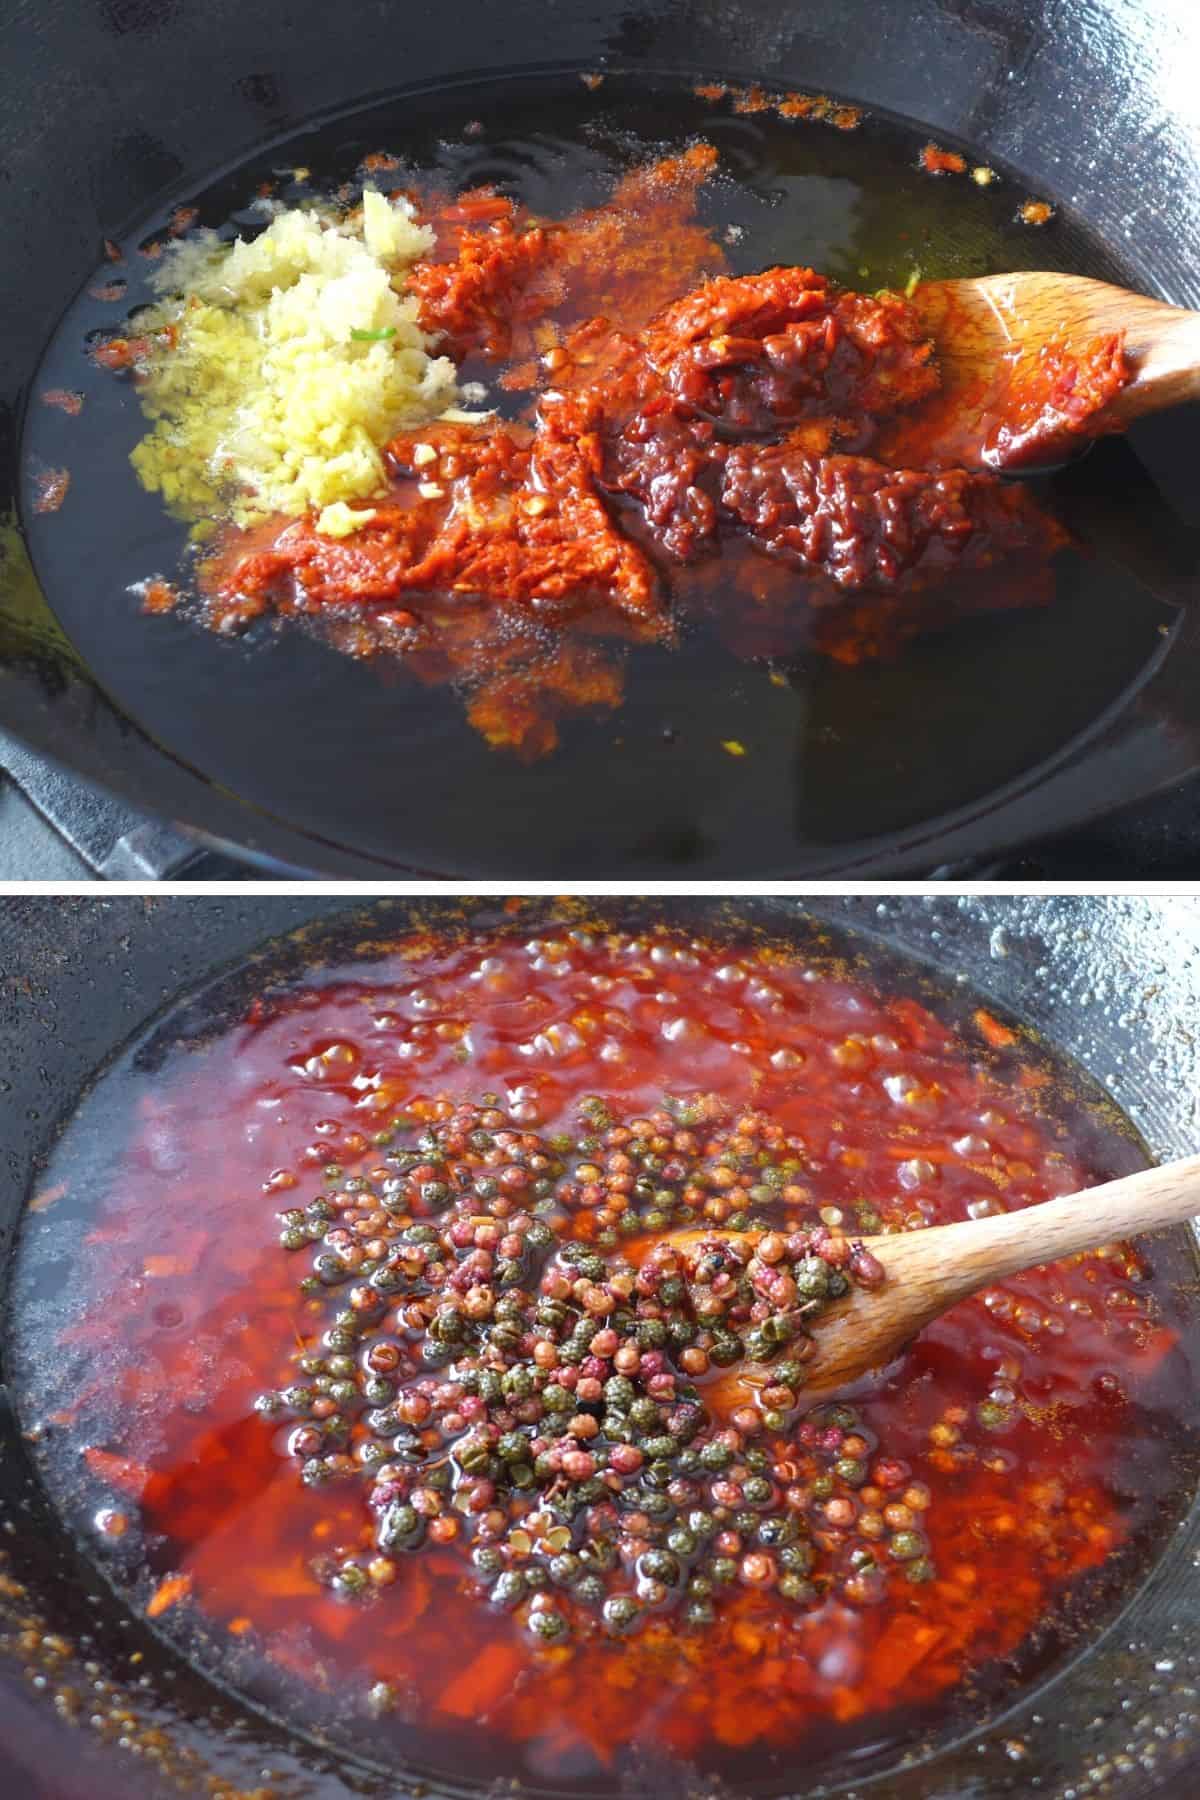 frying chili paste, garlic and Sichuan pepper in oil